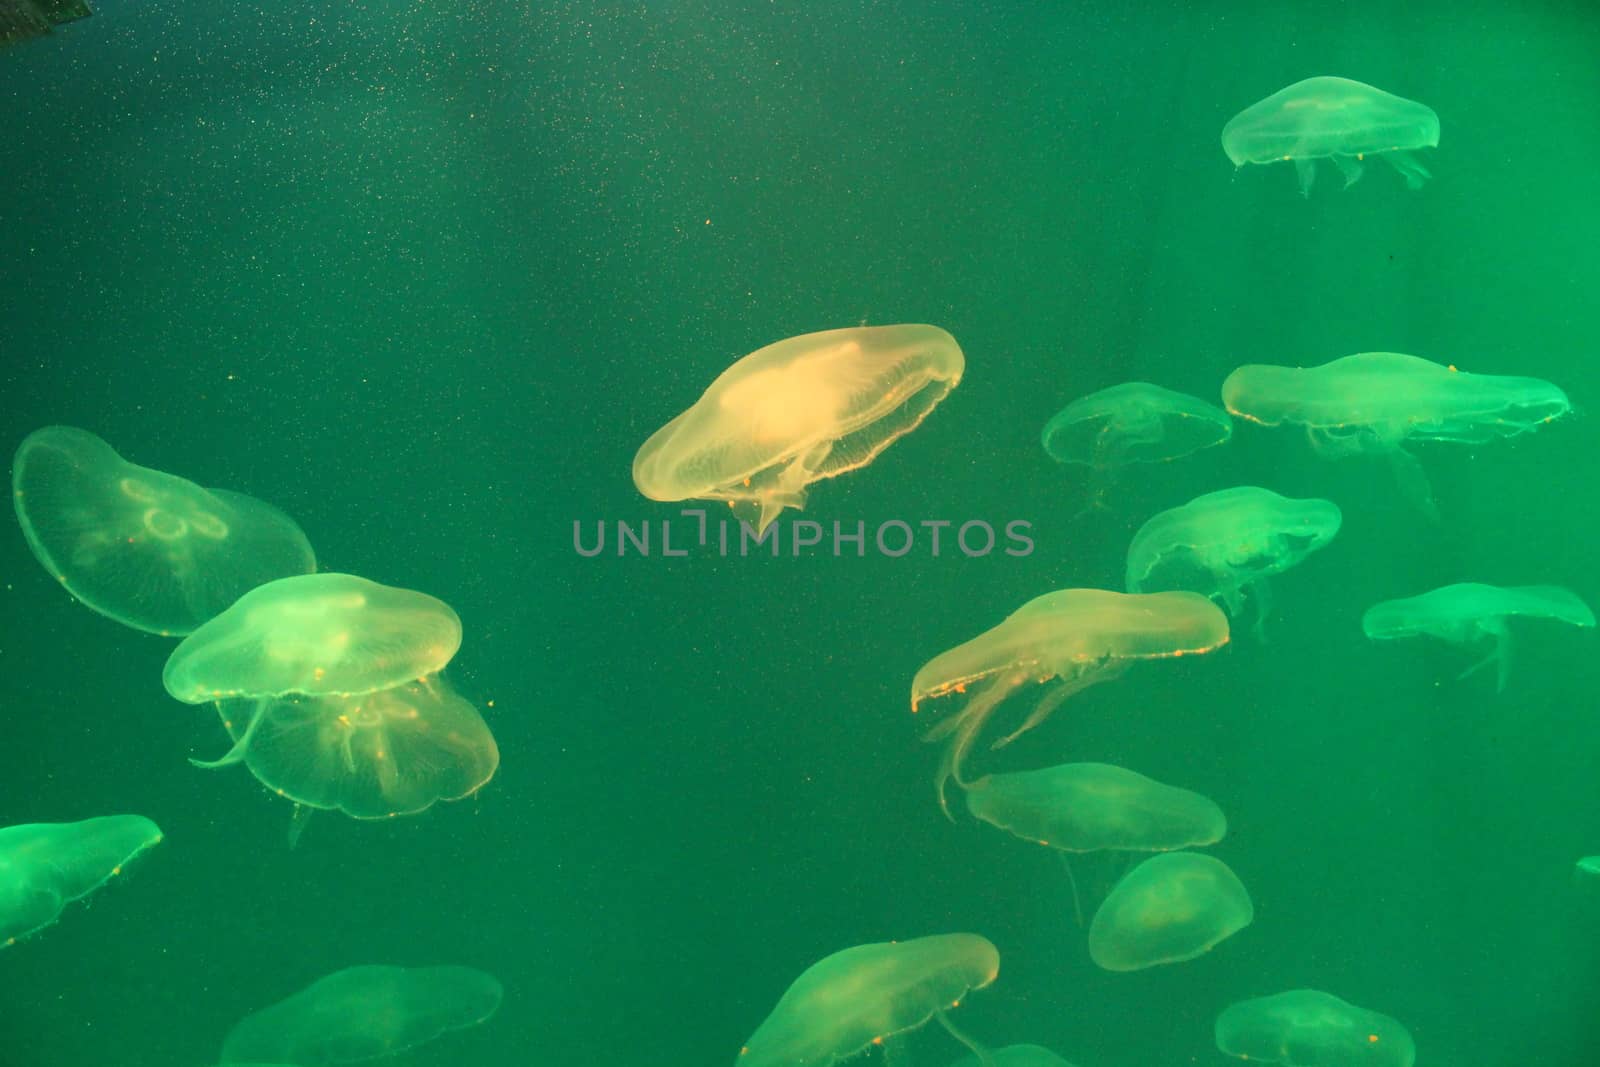 Jellyfish in the sea illuminated by beautiful lights by SmirMaxStock